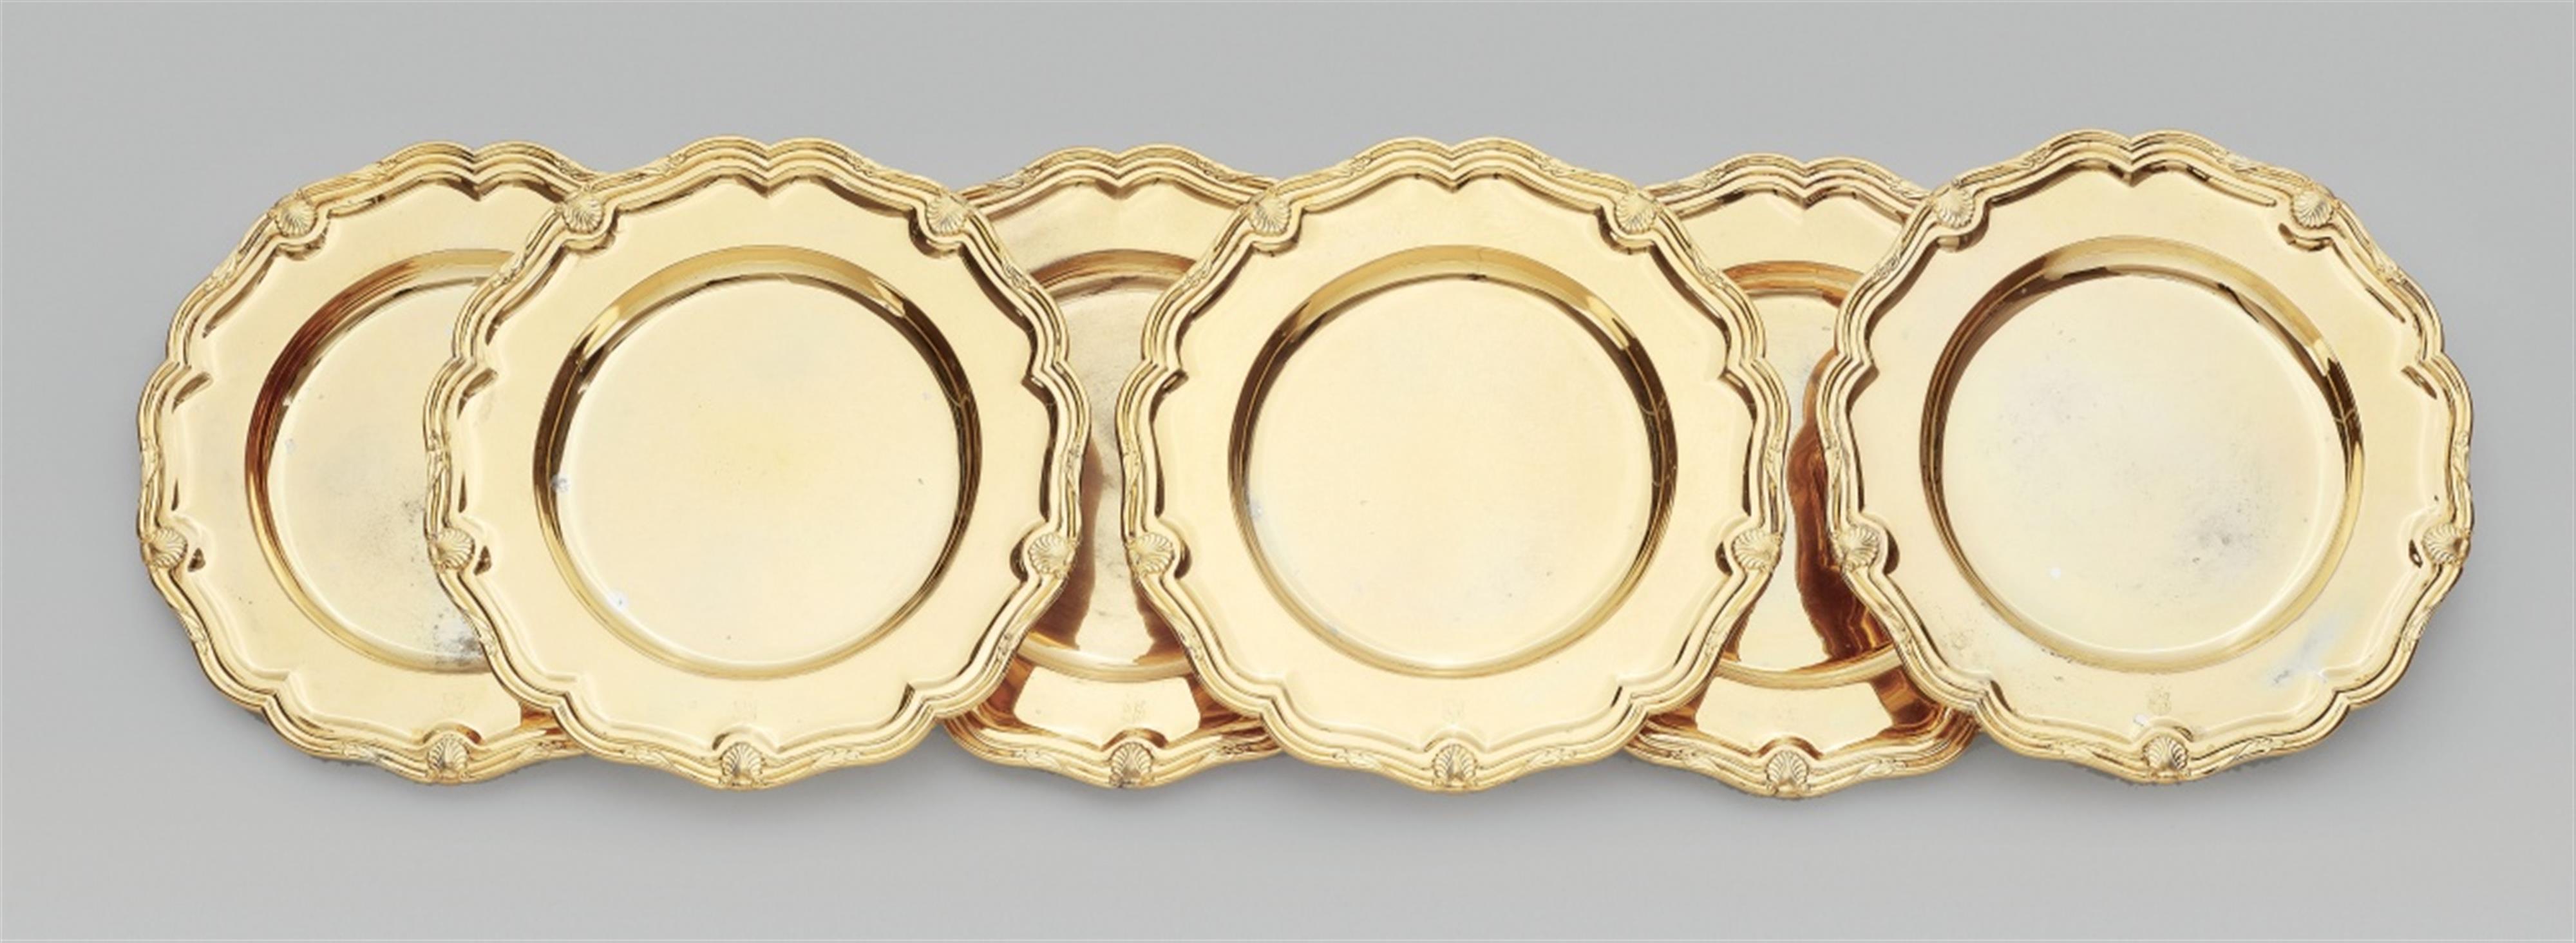 12 Berlin silver gilt plates made for the Grand Dukes of Mecklenburg-Schwerin - image-1